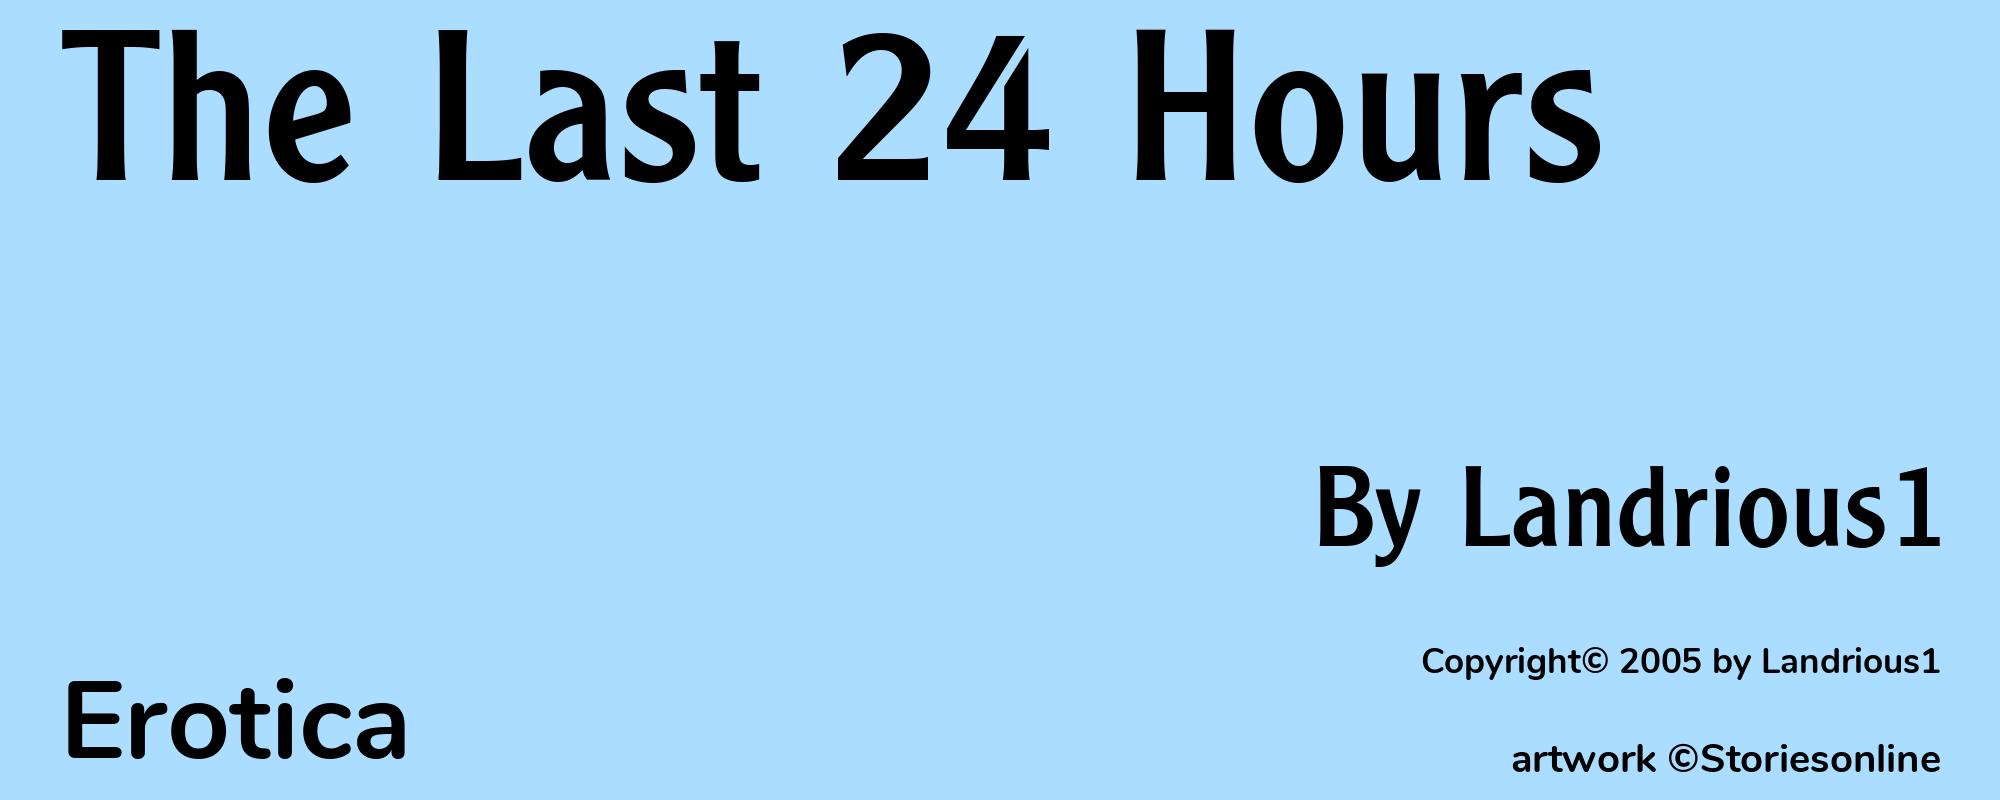 The Last 24 Hours - Cover